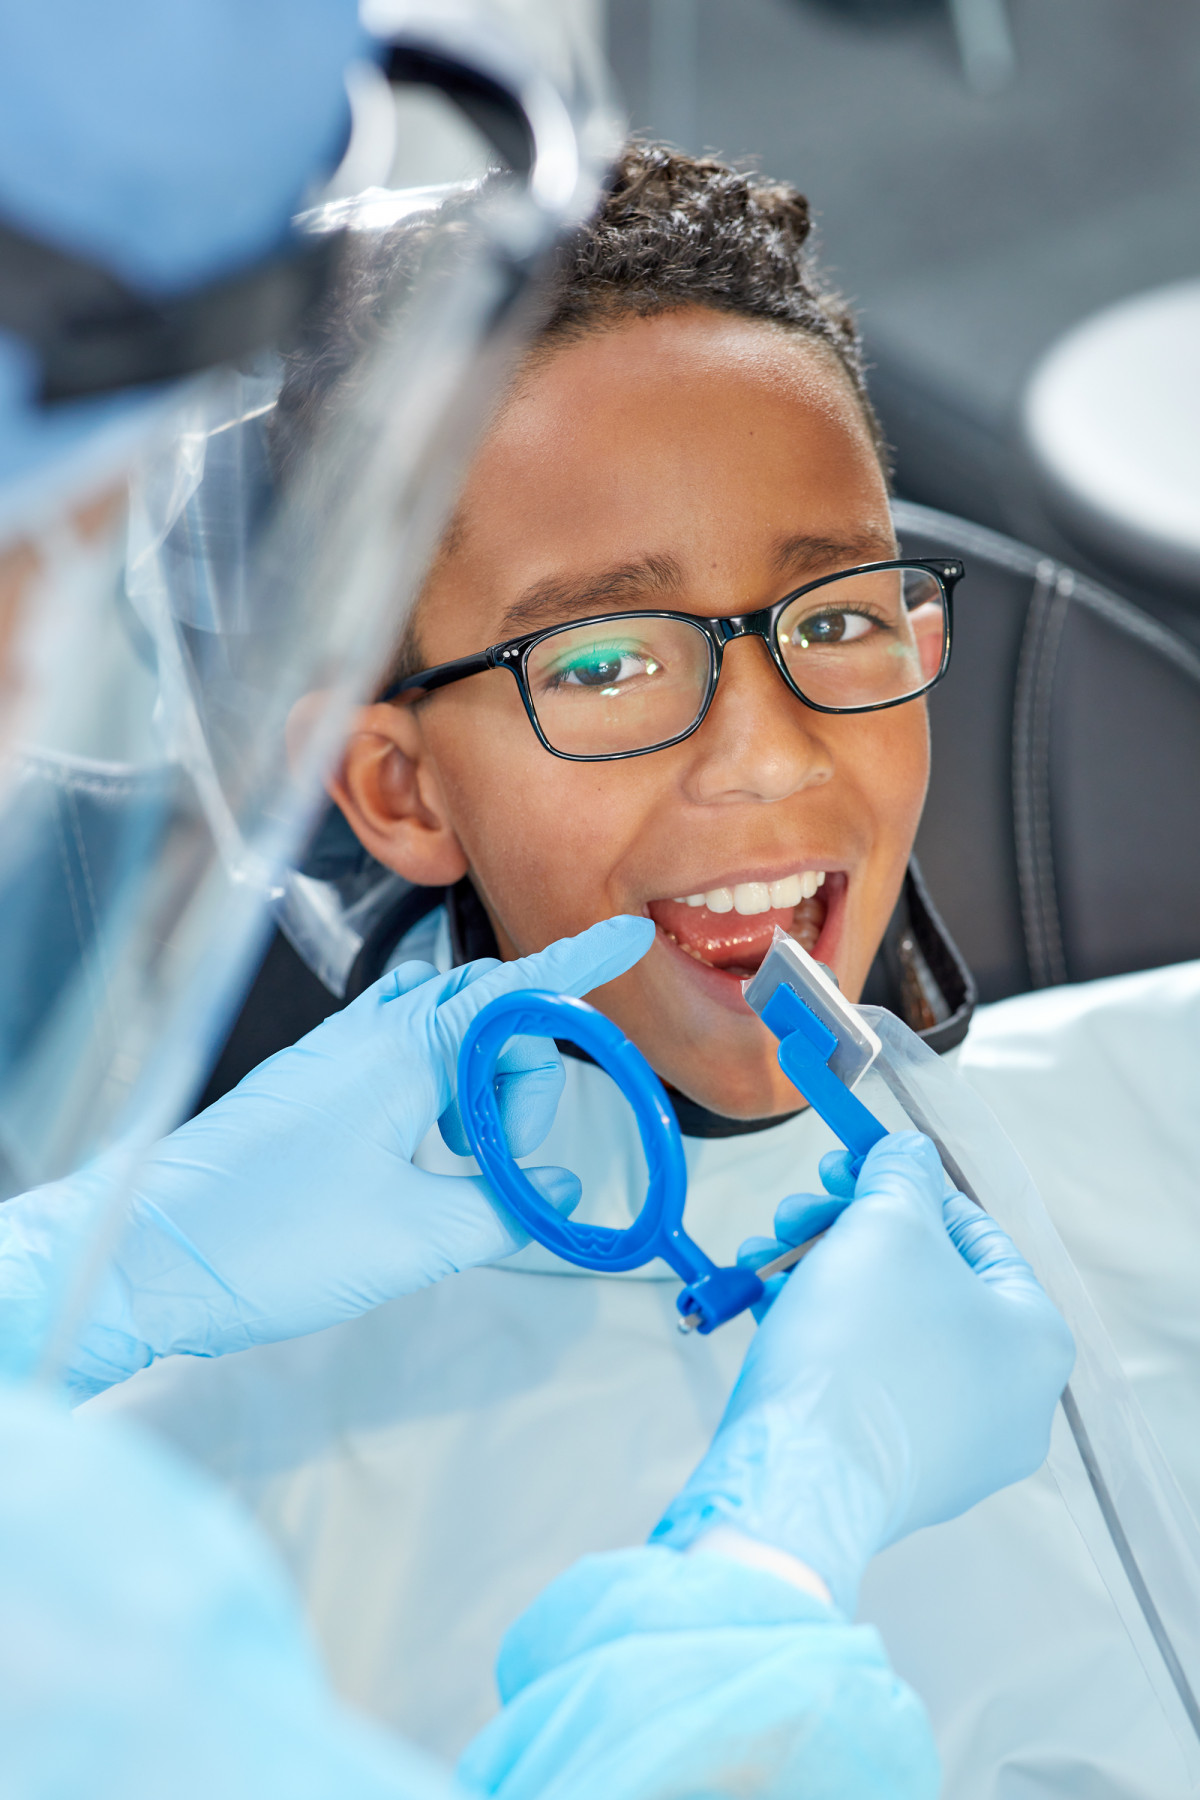 Commercial dental photography of young boy in dentist chair being prepped for x-rays